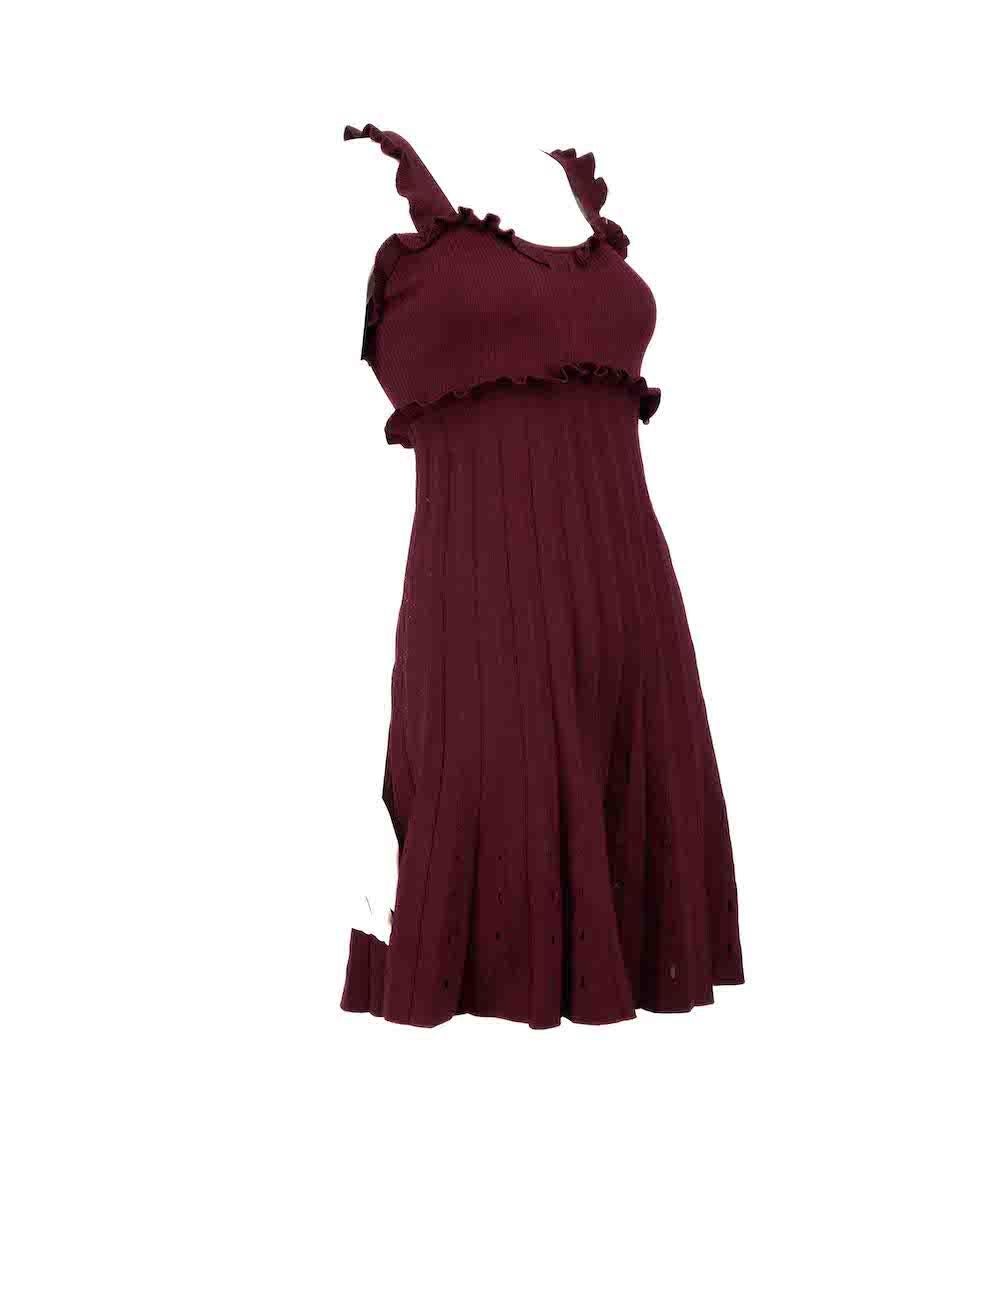 CONDITION is Good. Minor wear to dress is evident. Light wear is seen in the form of some marks and pilling of the fabric on the right side of the dress on this used Sandro designer resale item.
 
 
 
 Details
 
 
 Burgundy
 
 Viscose
 
 Knit dress
